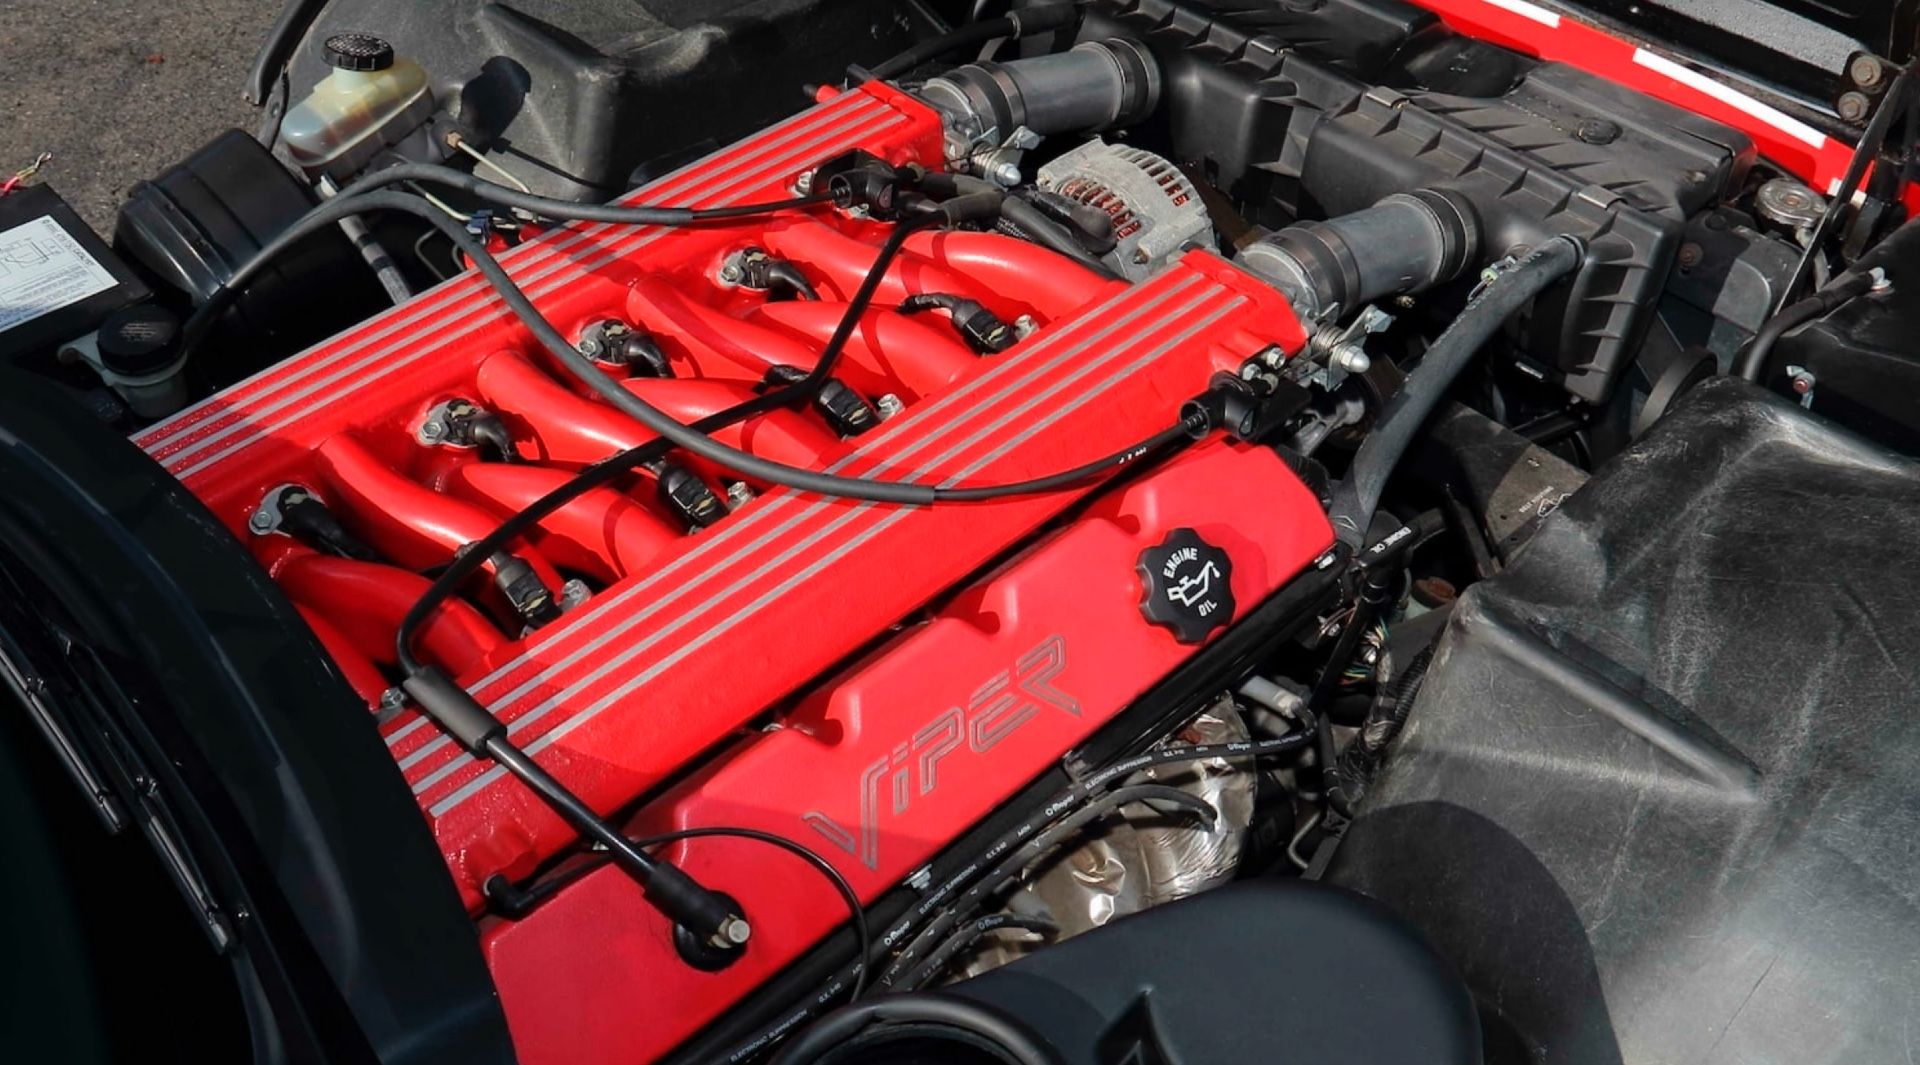 Red 1993 Dodge Viper RT/10 Callaway 440 Pace Car V10 Engine